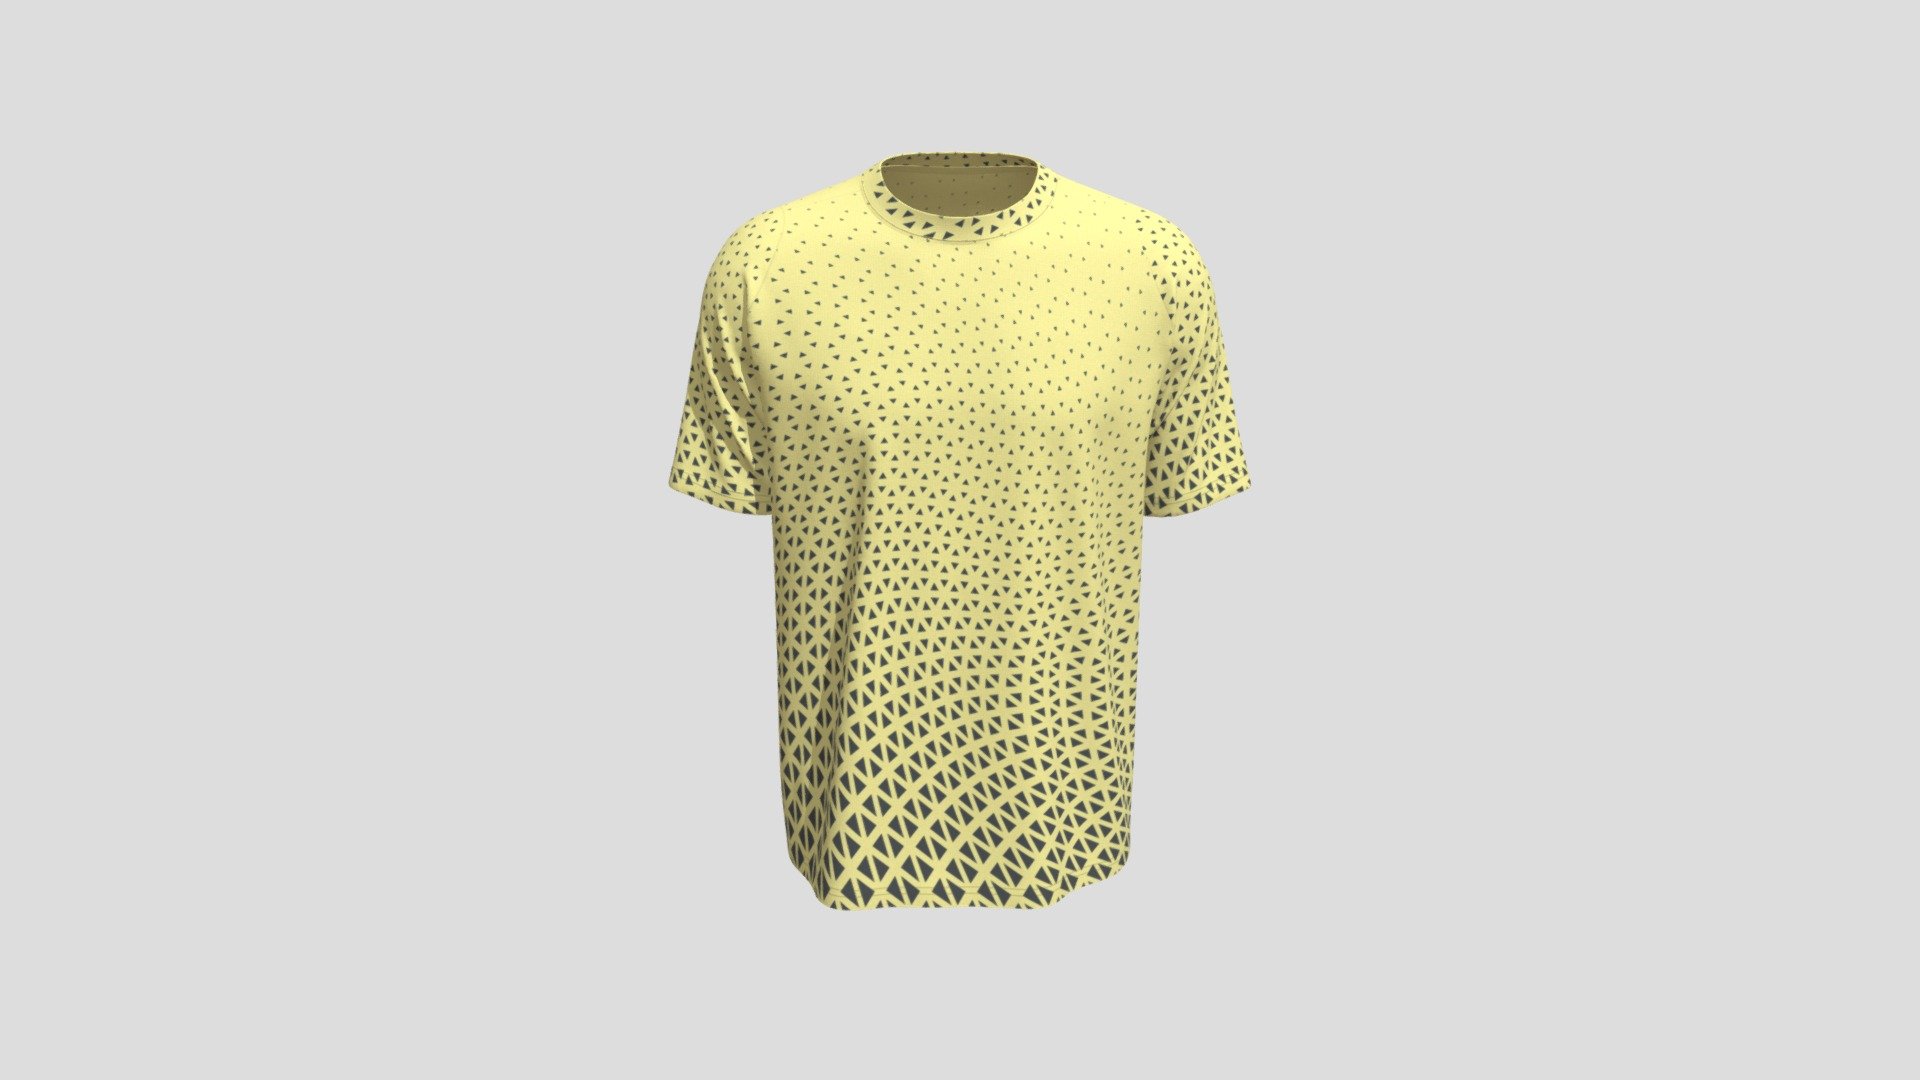 Cloth Title = Sporty T- Shirt Design in Yellow Color 

SKU = DG100017 

Category = Men 

Product Type = T-Shirt 

Cloth Length = Regular 

Body Fit = Relaxed Fit 

Occasion = Casual  


Our Services:

3D Apparel Design.

OBJ,FBX,GLTF Making with High/Low Poly

Fabric Digitalization

Mockup making

3D Teck Pack

Pattern Making

2D Illustration

Cloth Animation and 360 Spin Video


Contact us:- 

Email: info@digitalfashionwear.com 

Website: https://digitalfashionwear.com 

WhatsApp No: +8801759350445 


We designed all the types of cloth specially focused on product visualization, e-commerce, fitting, and production. 

We will design: 

T-shirts 

Polo shirts 

Hoodies 

Sweatshirt 

Jackets 

Shirts 

TankTops 

Trousers 

Bras 

Underwear 

Blazer 

Aprons 

Leggings 

and All Fashion items





Our goal is to make sure what we provide you, meets your demand 3d model